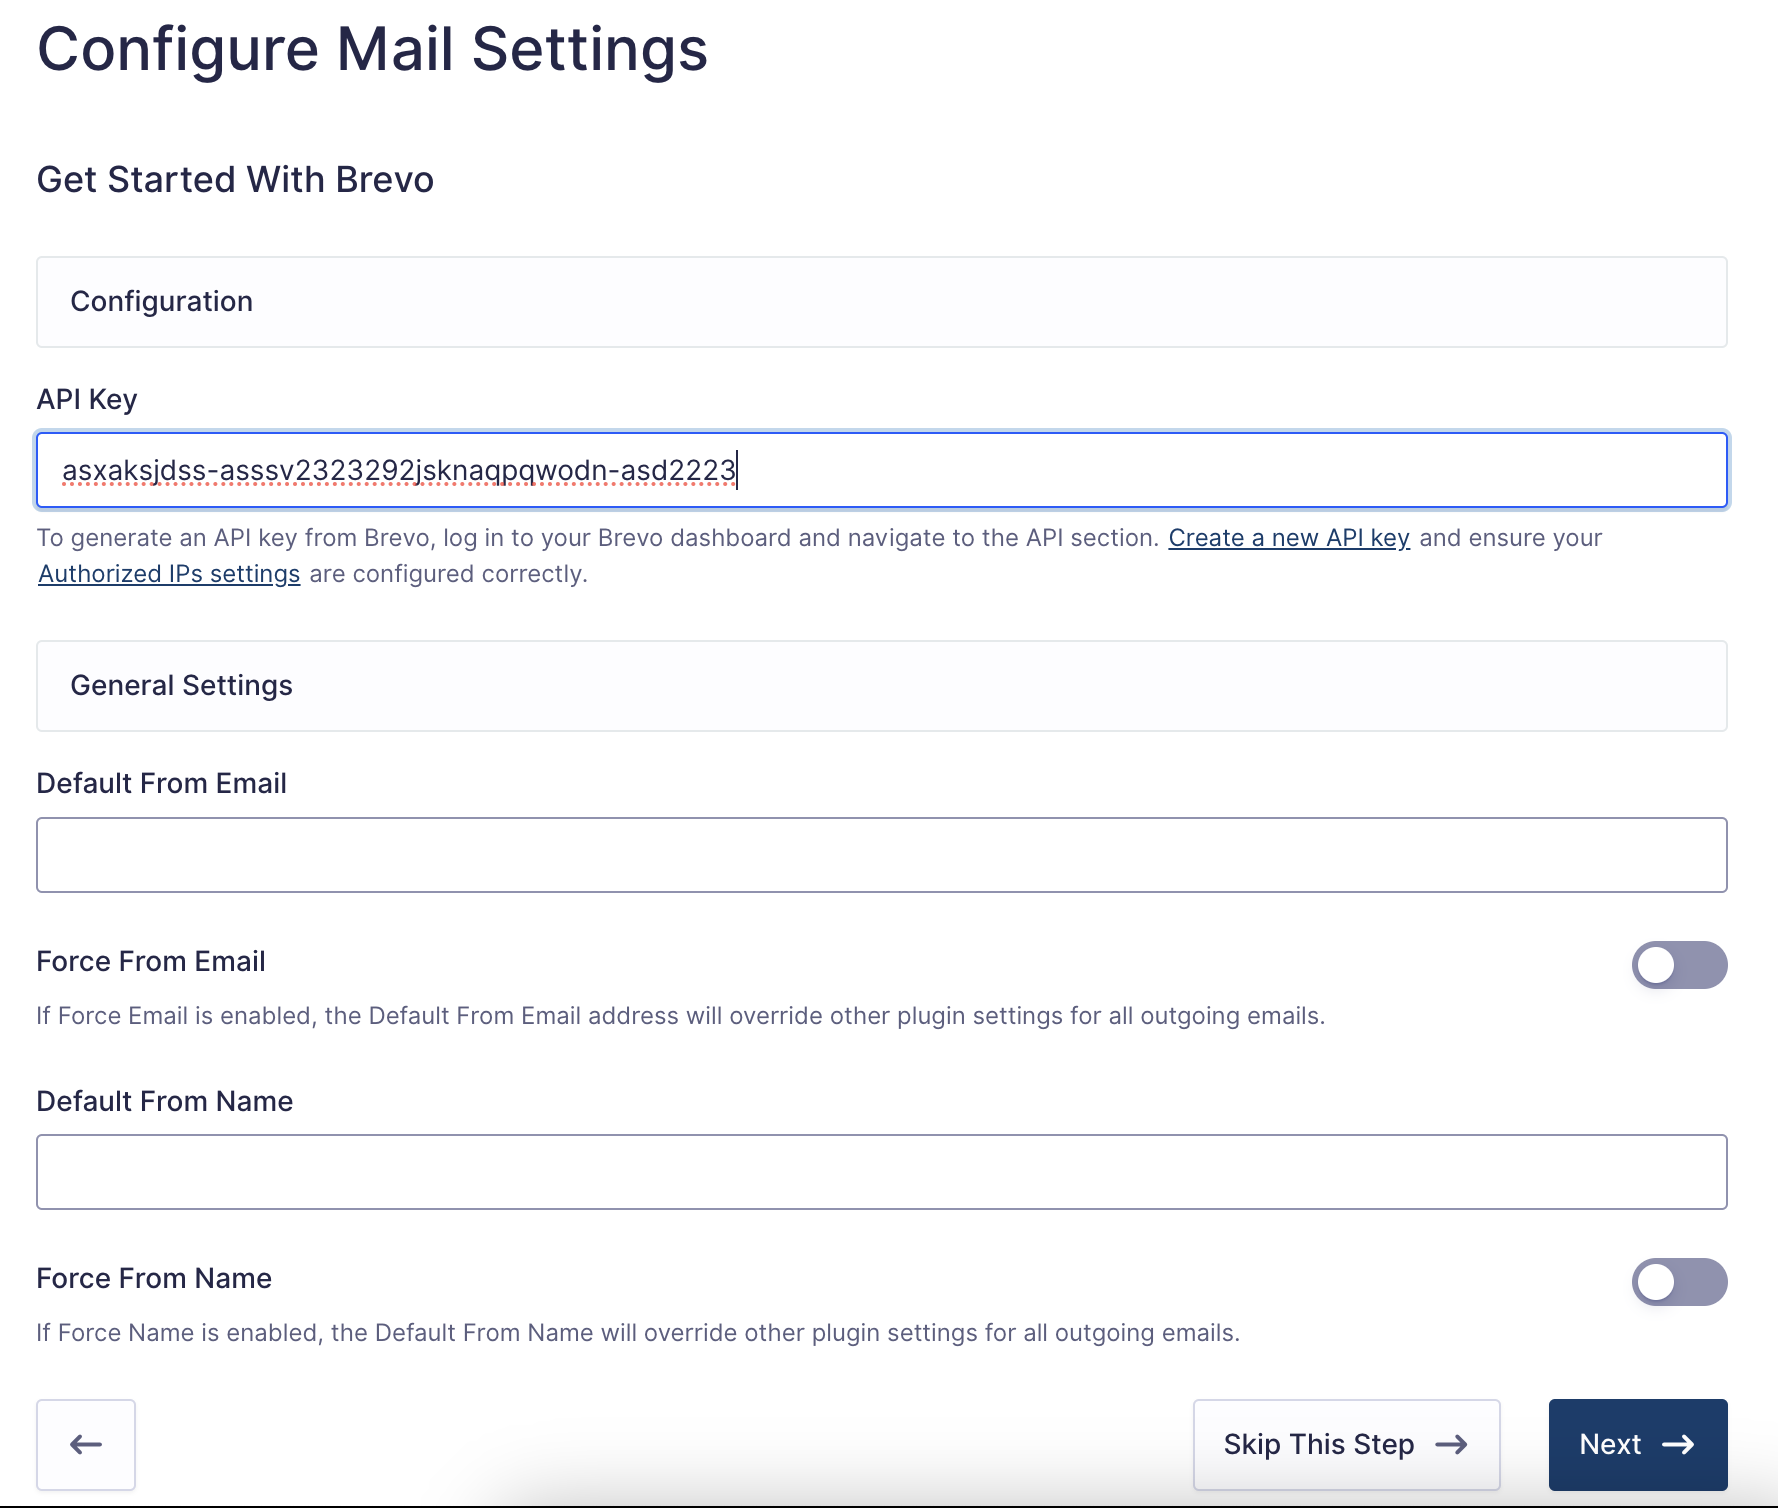 Image showing mail settings for the selected Gravity SMTP connection